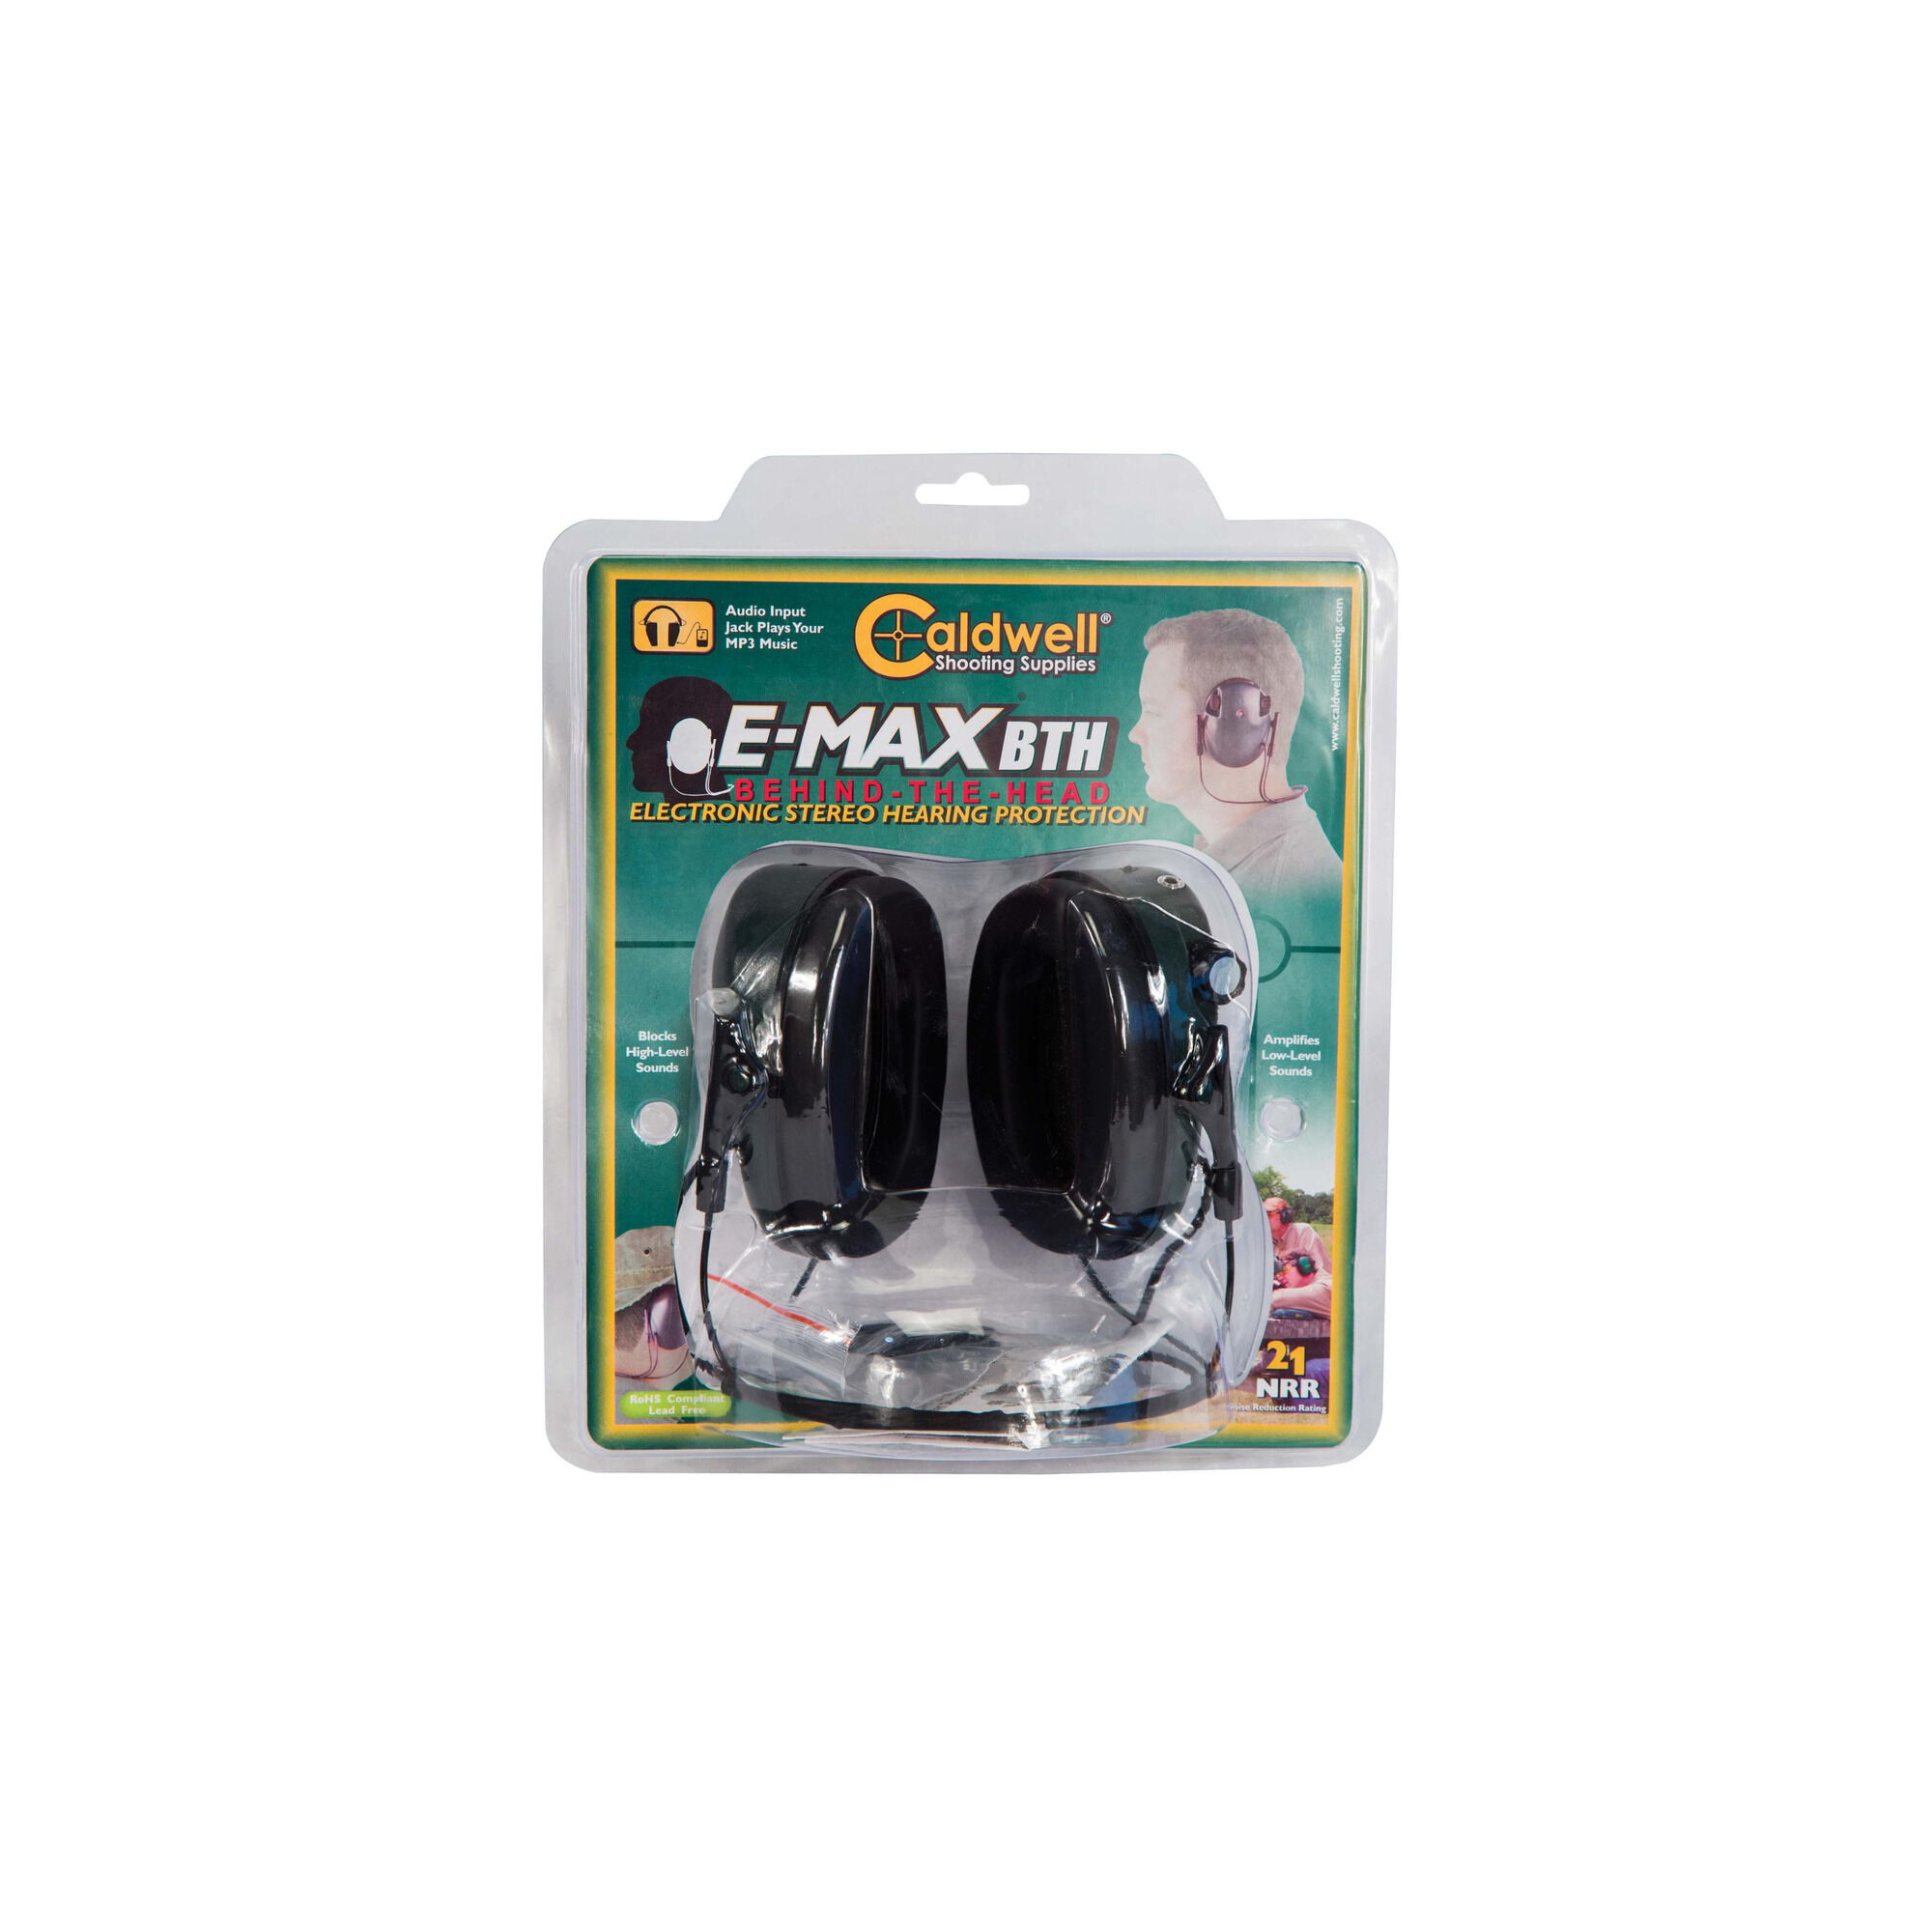 Caldwell E-max Low Profile Behind The Neck Electronic Hearing Protection 487605 for sale online 